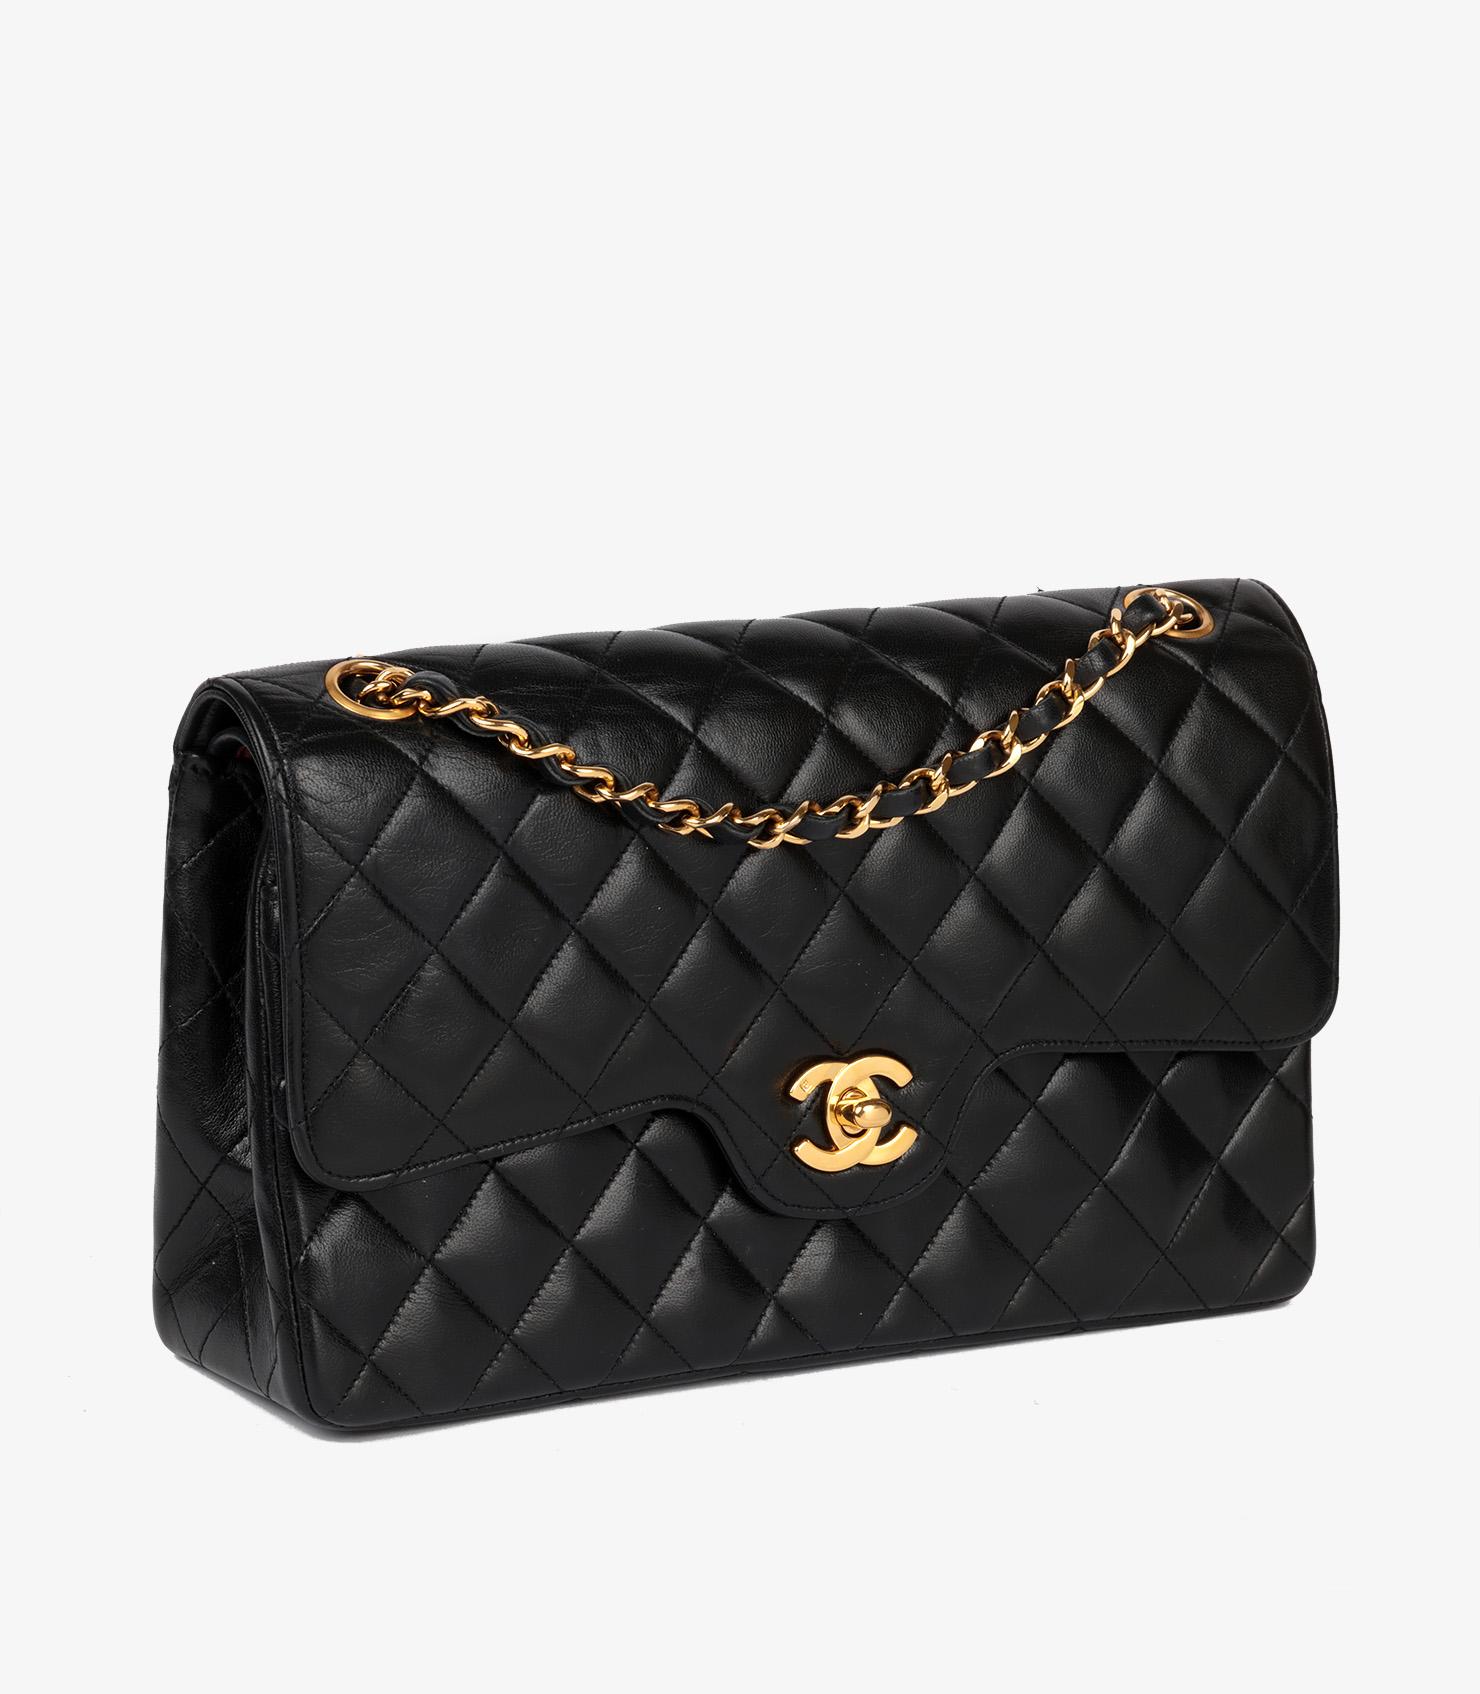 Chanel Black Quilted Lambskin Vintage Medium Classic Double Flap Bag

Brand- Chanel
Model- Medium Classic Double Flap Bag
Product Type- Shoulder
Serial Number- 17*****
Age- Circa 1989
Accompanied By- Chanel Dust Bag, Authenticity Card
Colour-